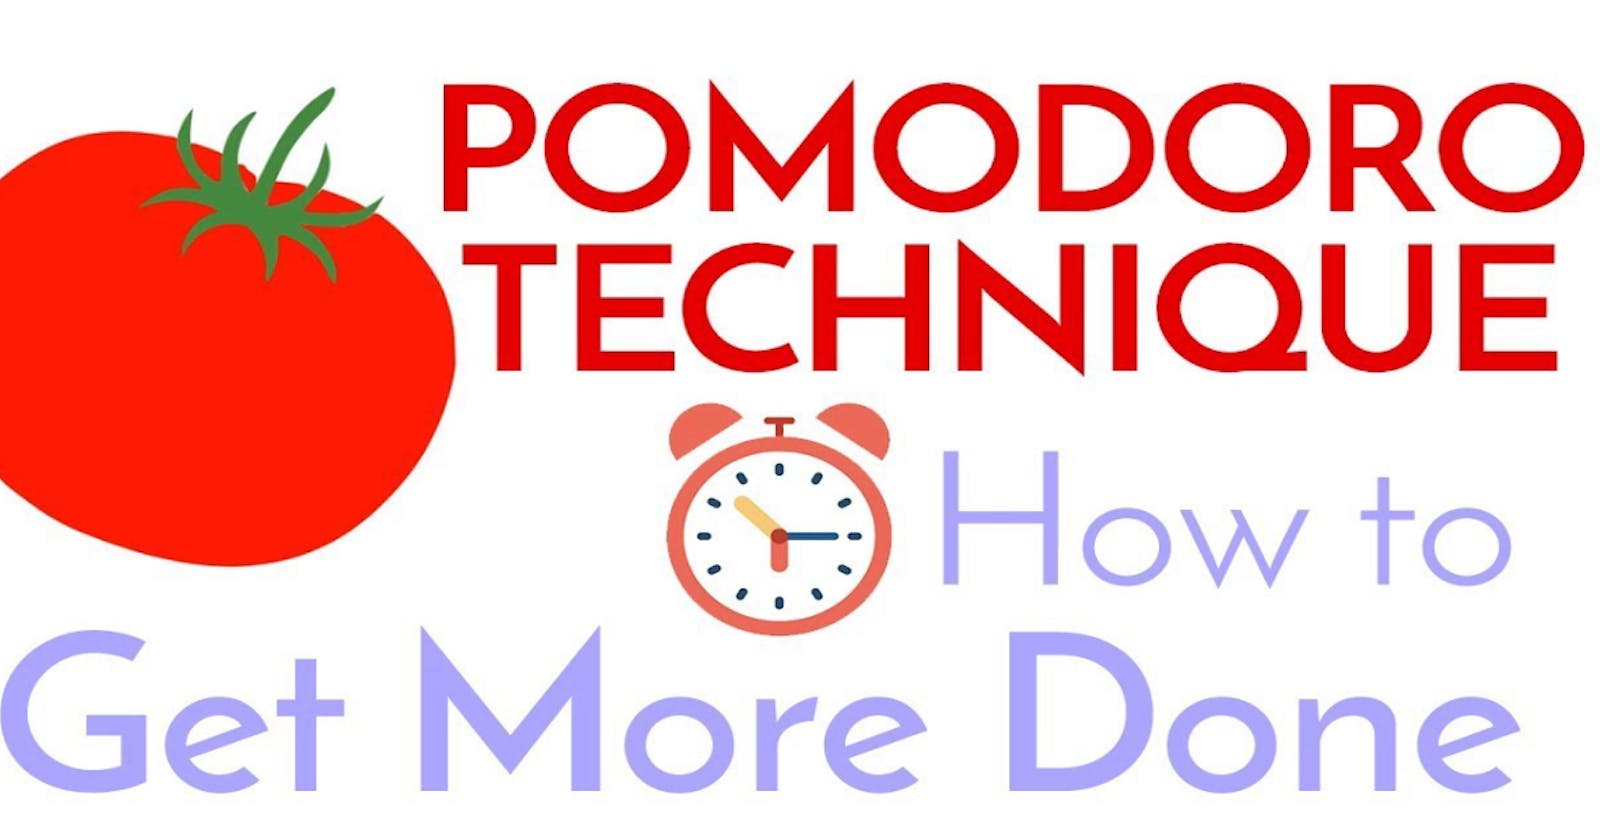 The Pomodoro Technique - Why, What, How - Productivity, Worksheet, Timer, Music